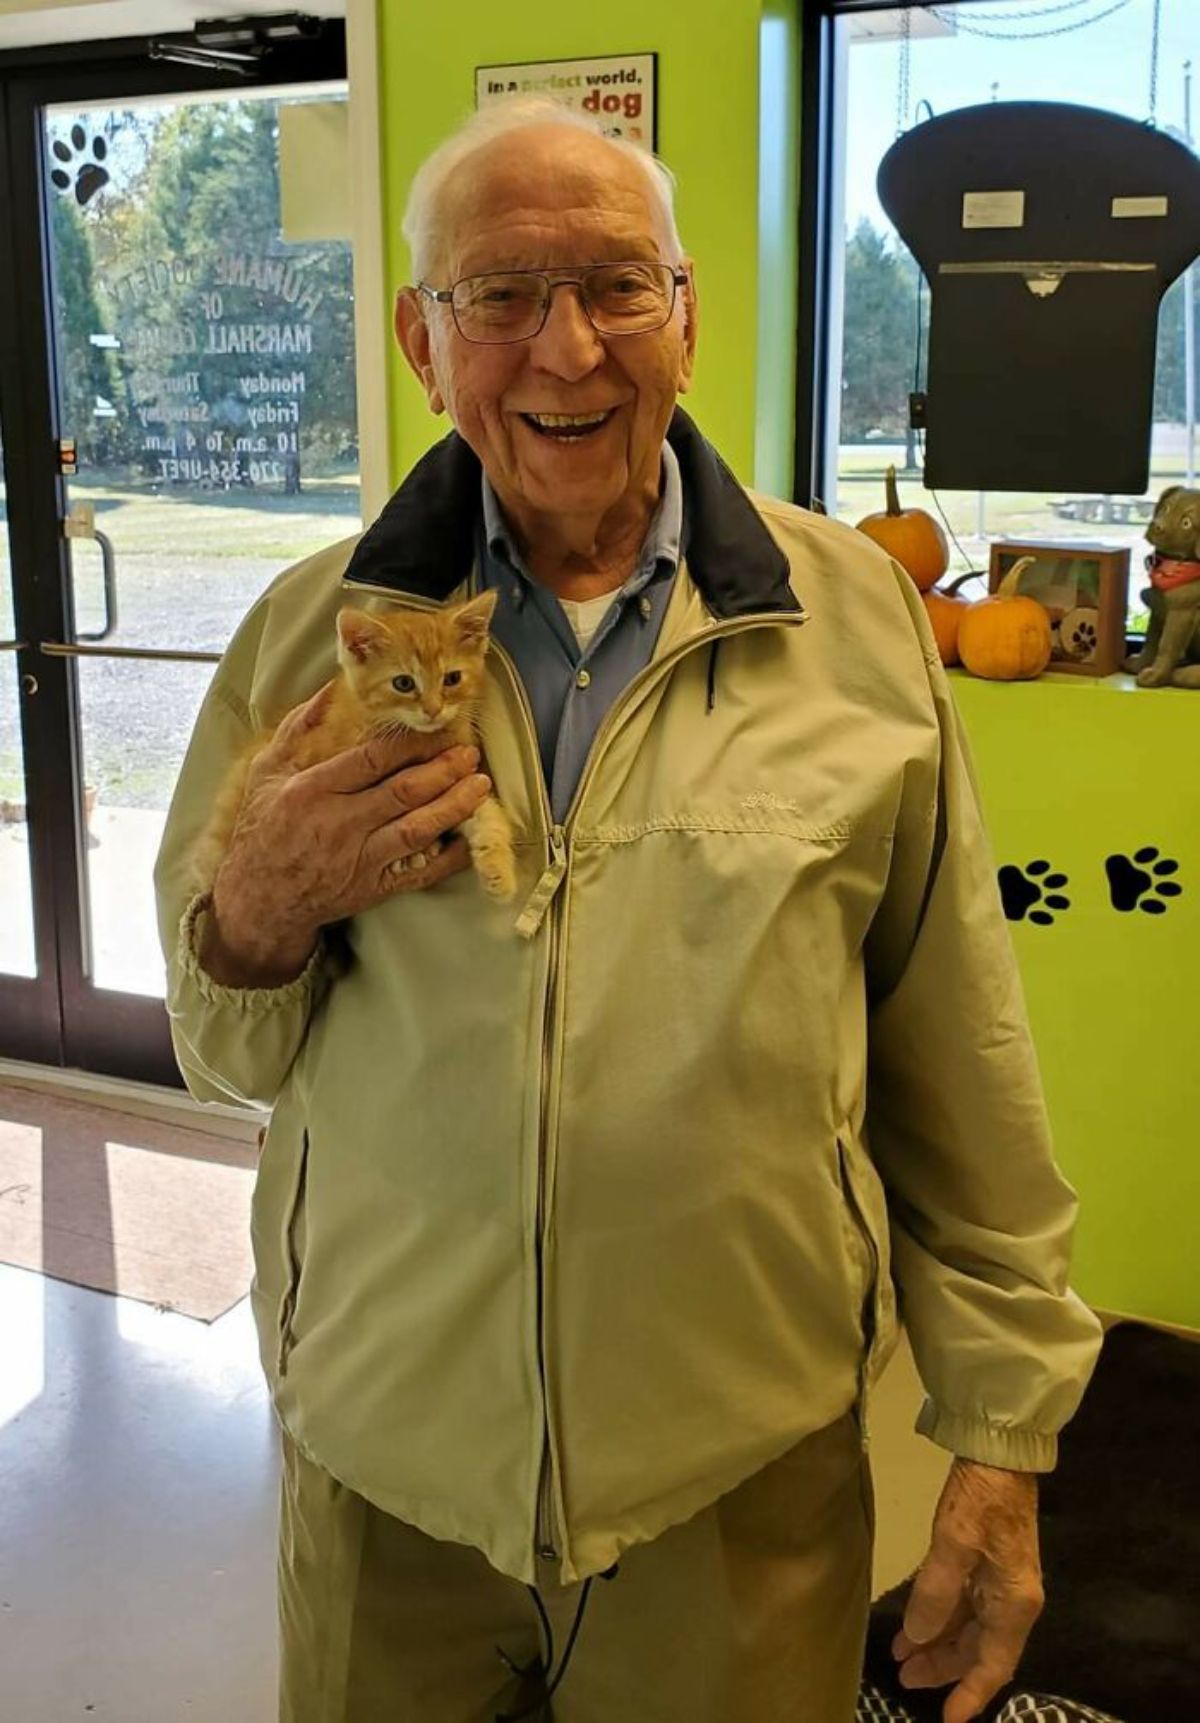 small orange kitten being held by an old man